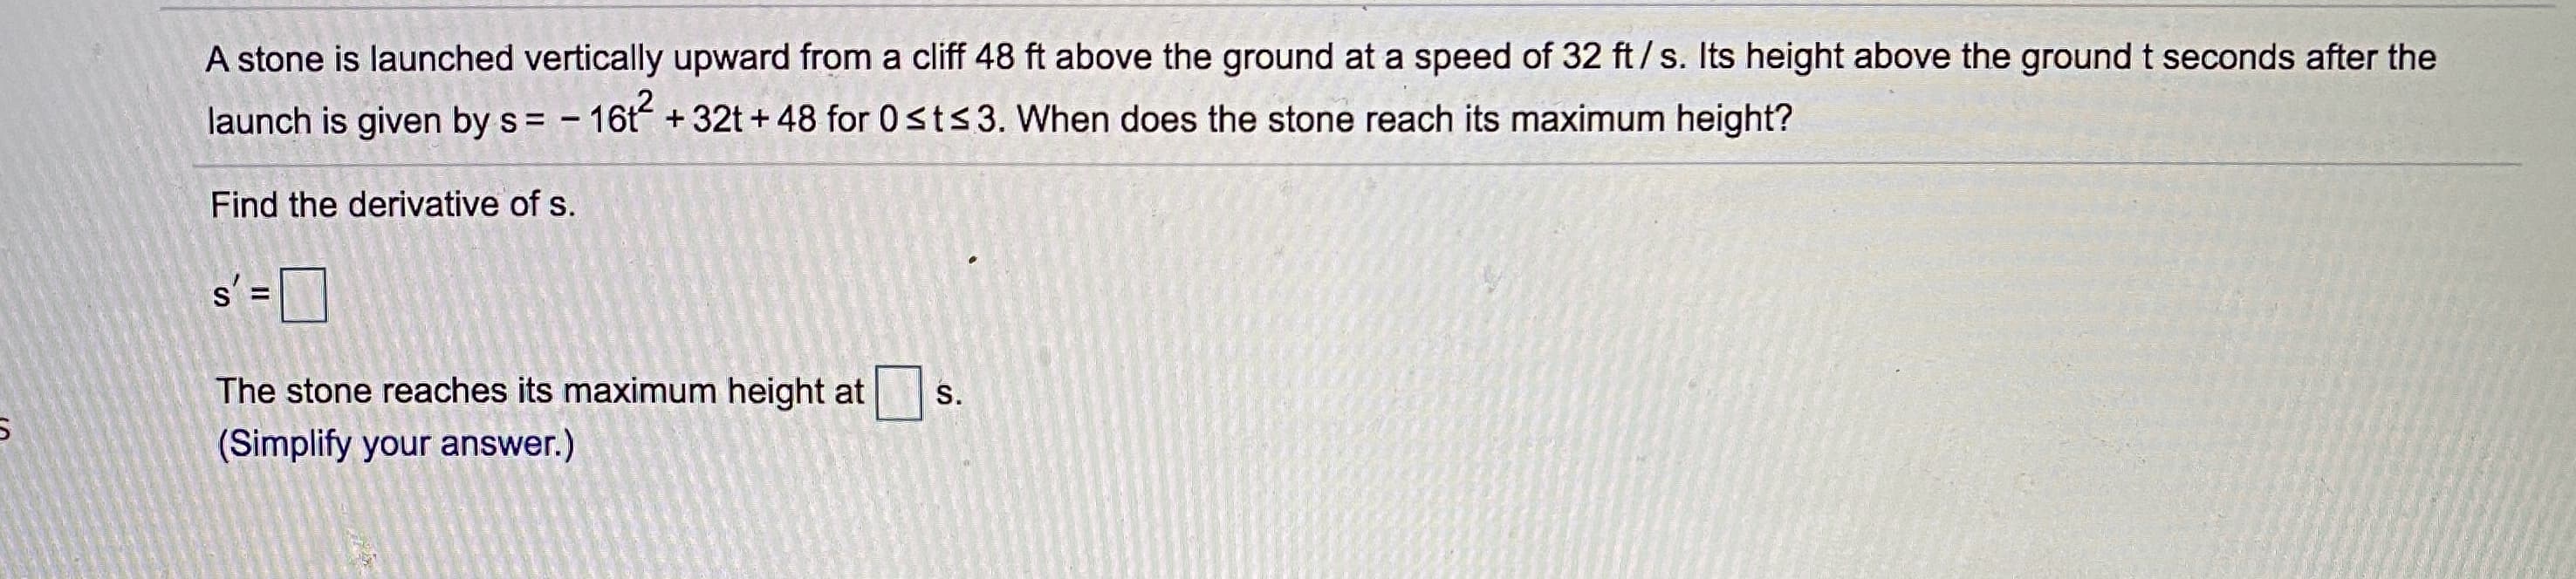 A stone is launched vertically upward from a cliff 48 ft above the ground at a speed of 32 ft/s. Its height above the ground t seconds after the
launch is given by s = - 16t +32t + 48 for 0sts3. When does the stone reach its maximum height?
Find the derivative of s.
s' =
D
The stone reaches its maximum height at
(Simplify your answer.)
S.
